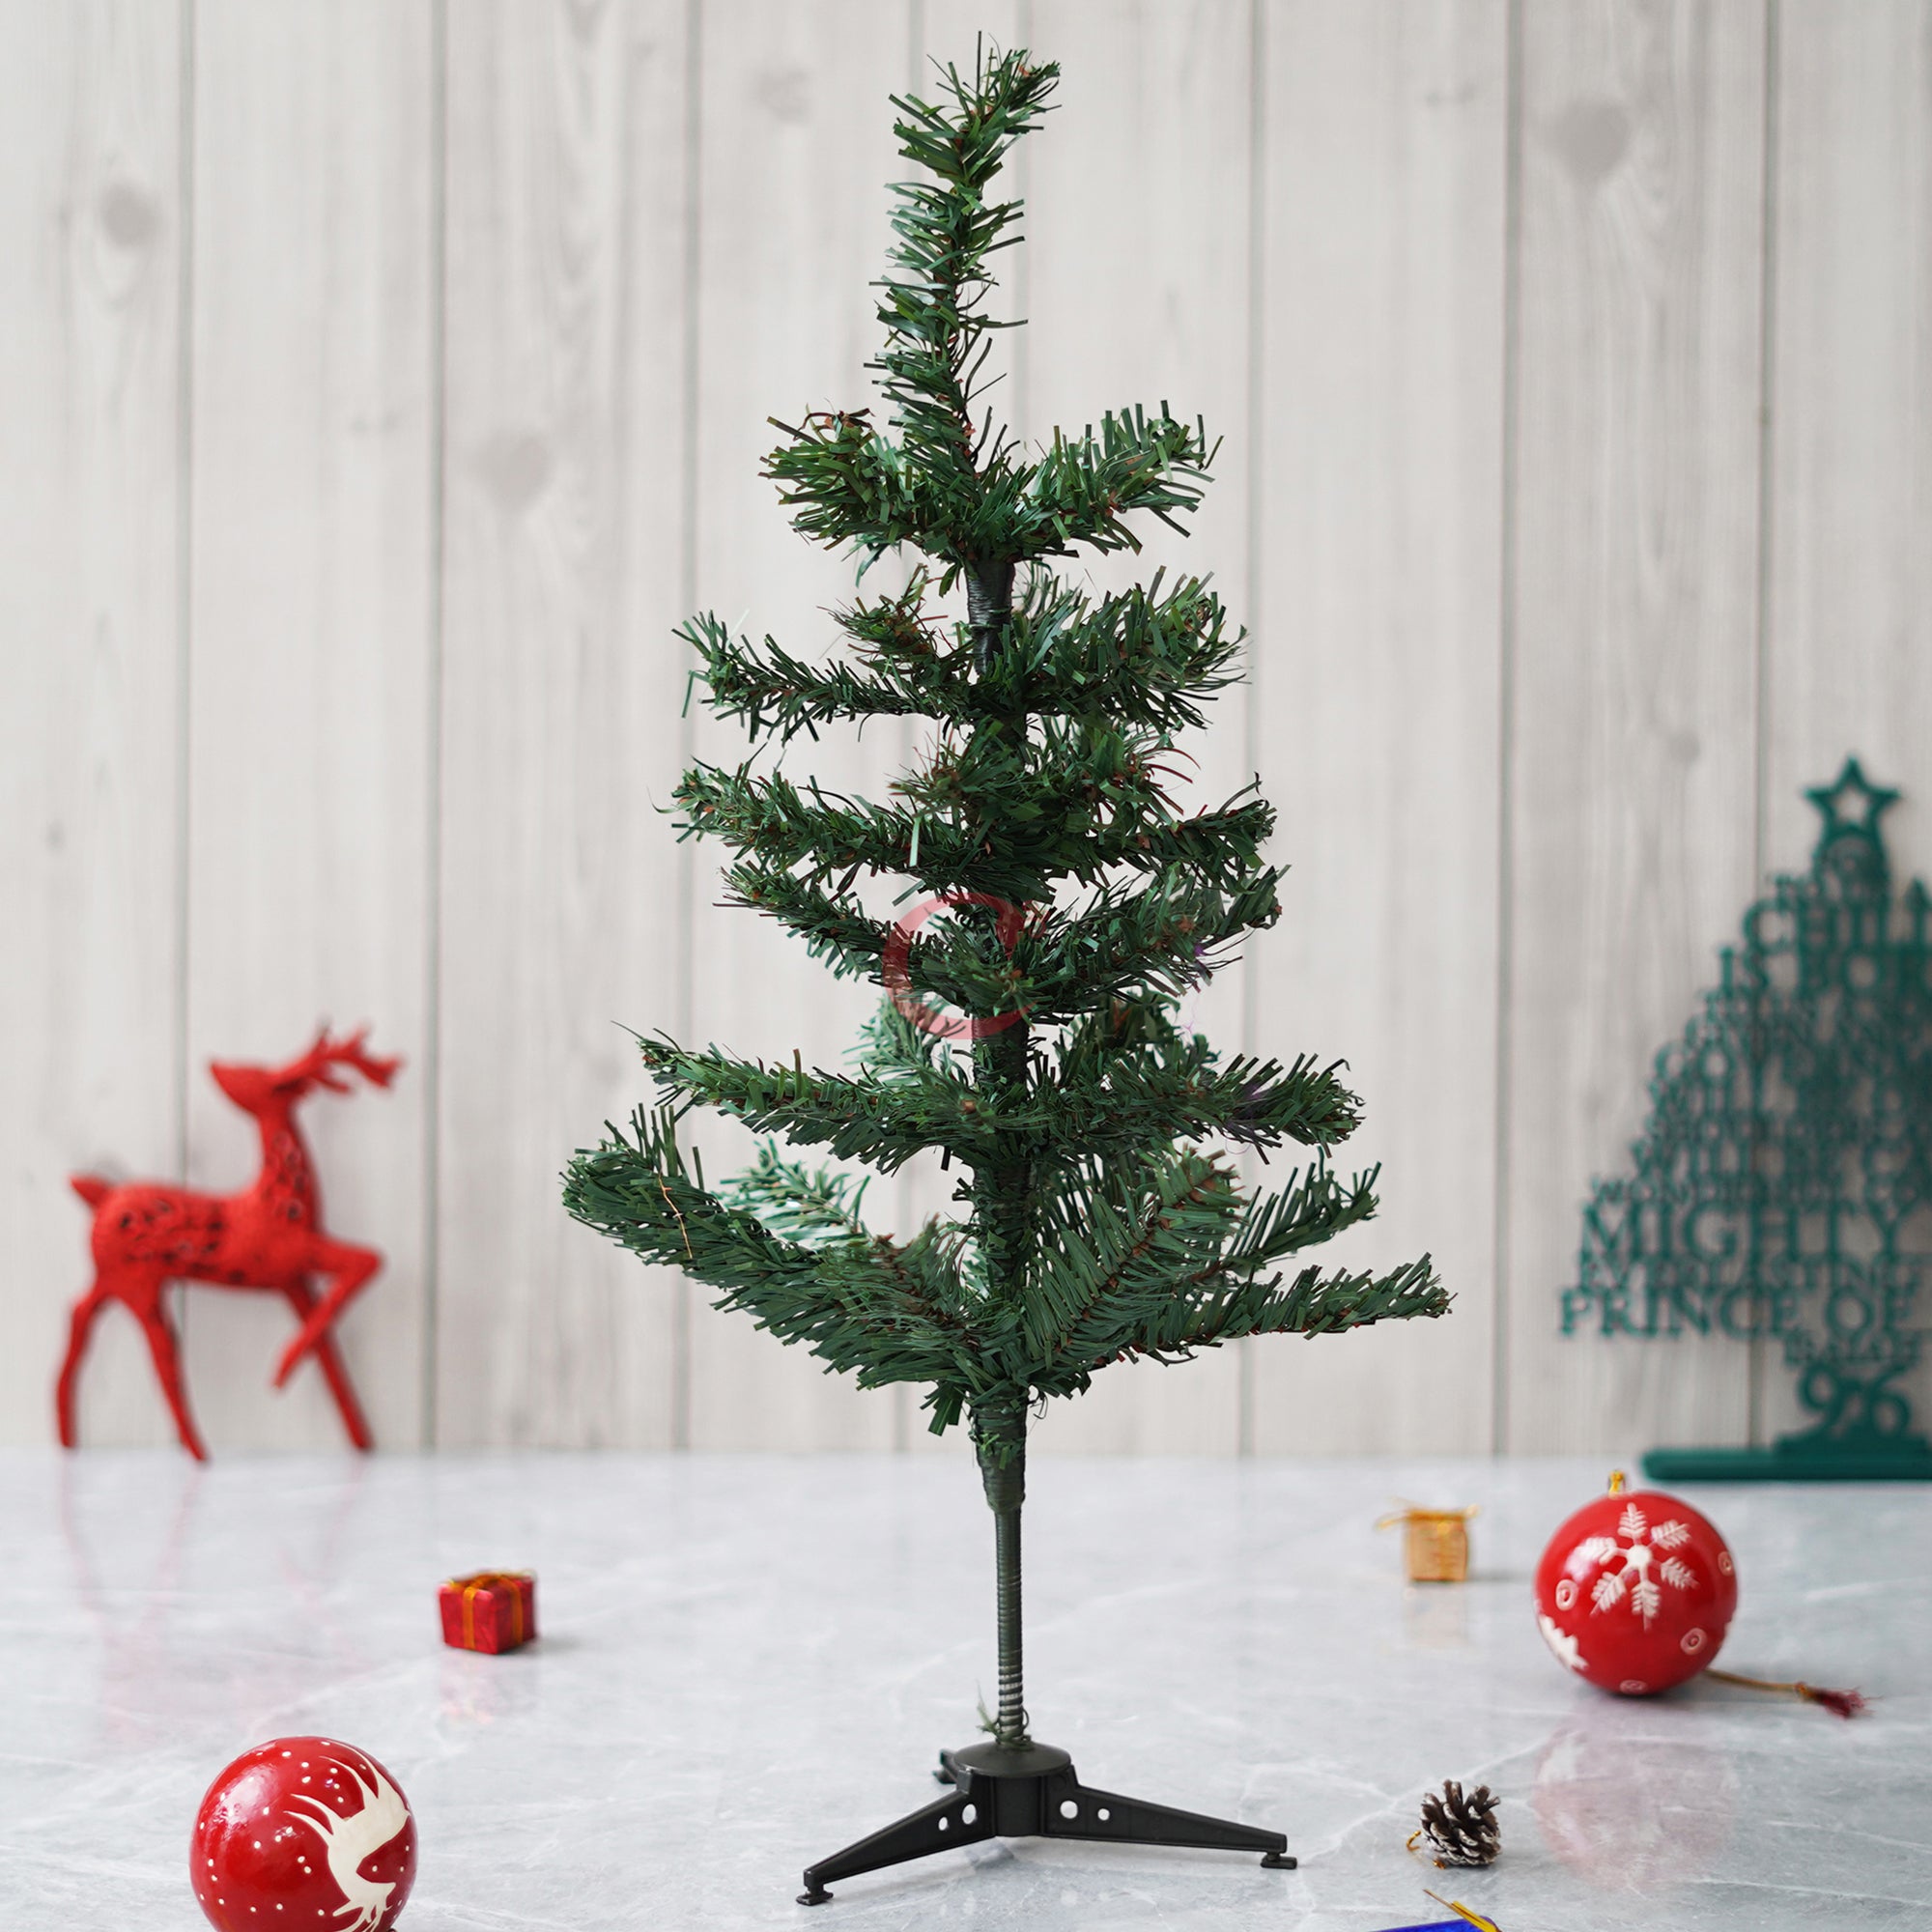 eCraftIndia 2 Feet Green Artificial Christmas Tree Xmas Pine Tree with Metal Stand - Xmas Tree for Indoor, Outdoor, Home, Living Room, Office, Church Decor - Merry Christmas Decoration Item 1